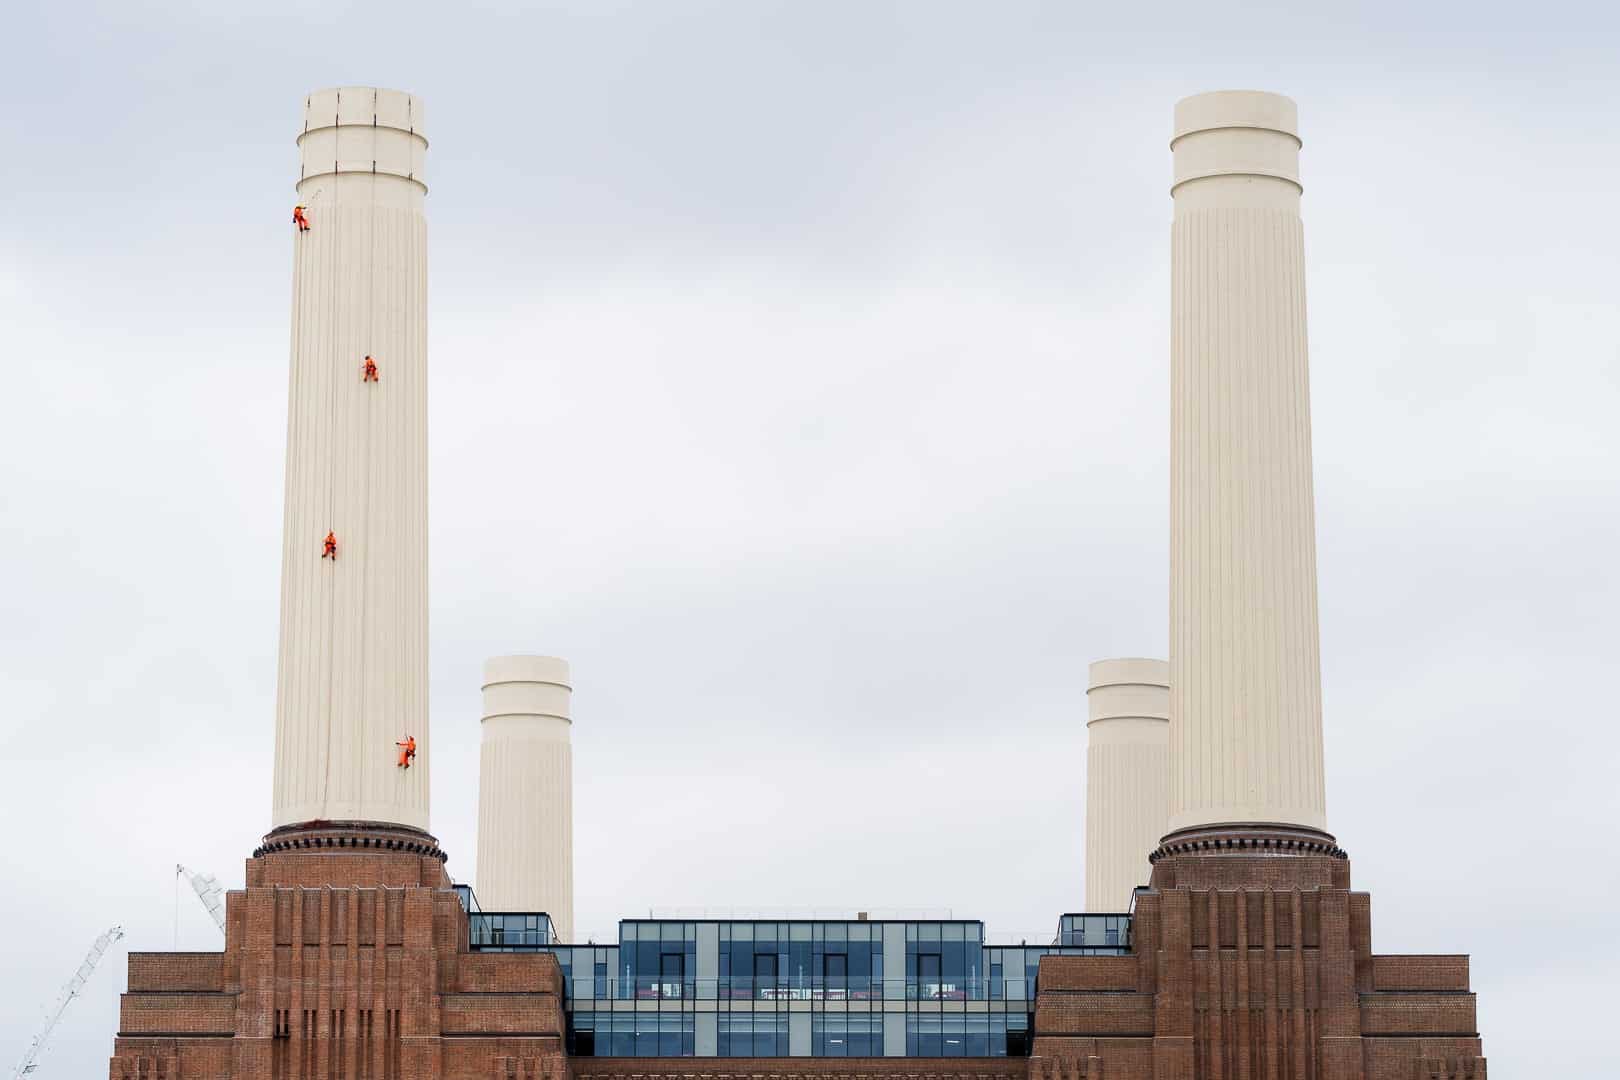 some people abseiling down the Battersea Power Station chimney to apply the last touches of paint to the chimney